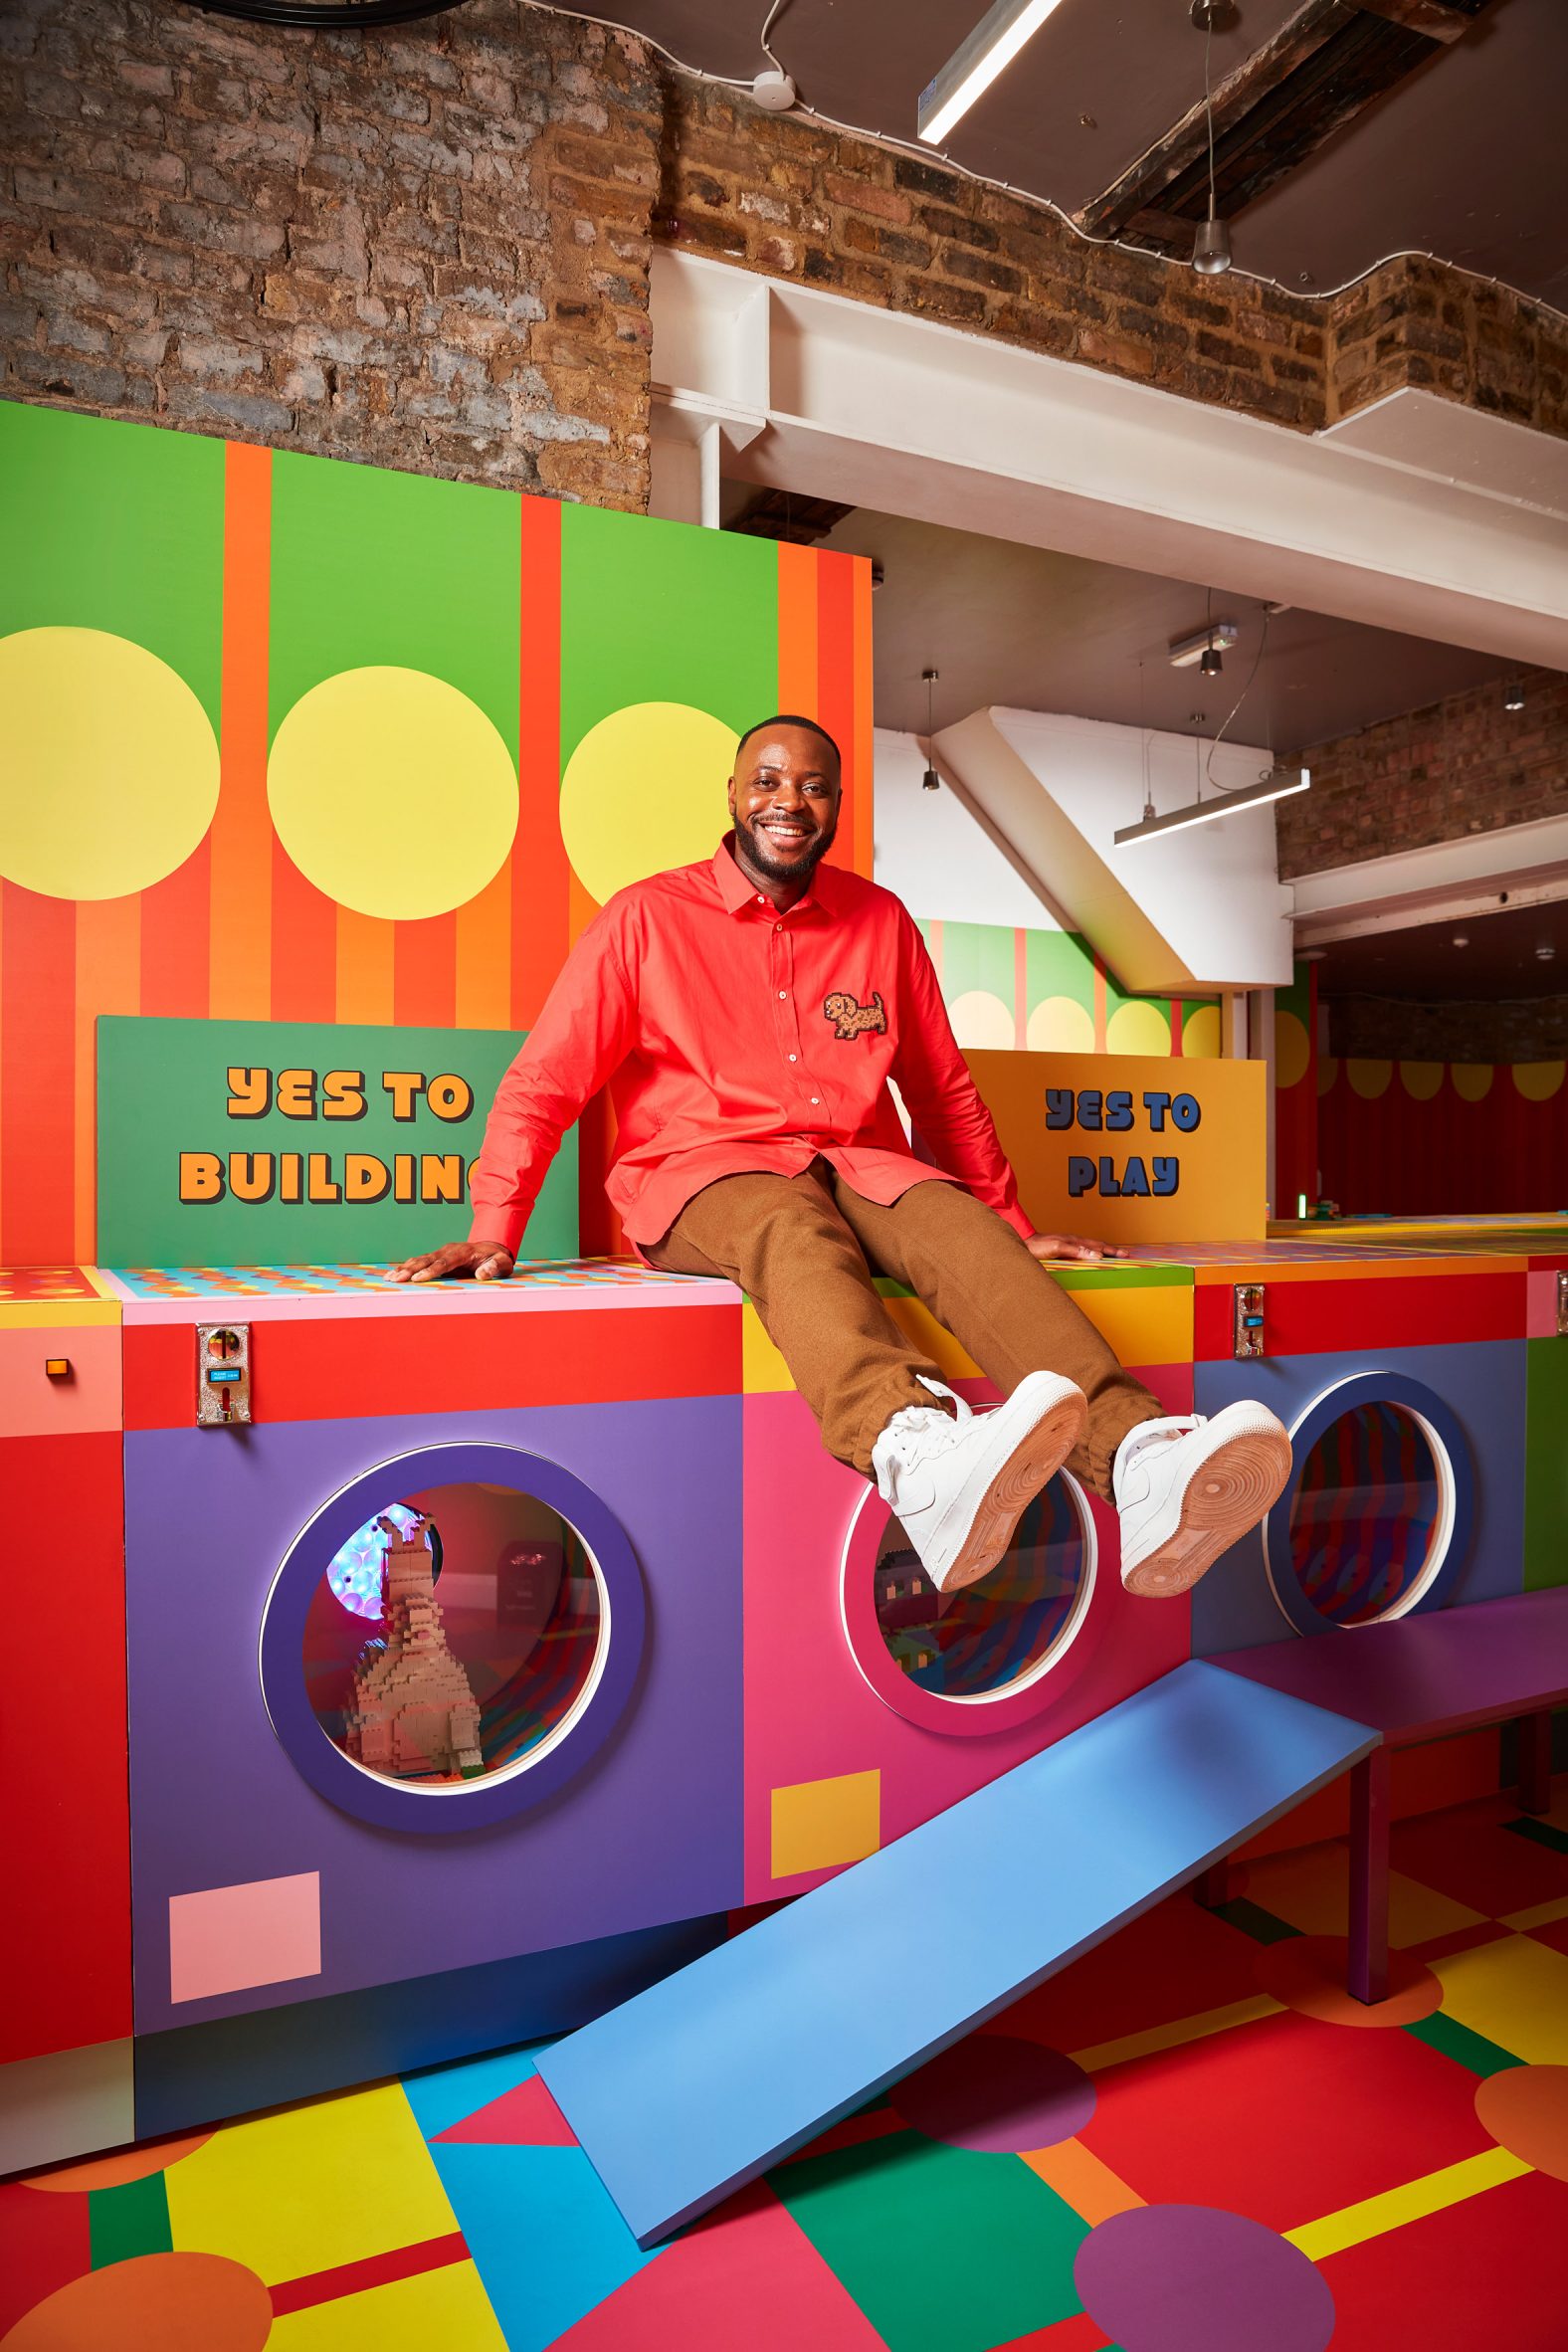 Yinka Ilori sits on a washing machine at the Laundrette of Dreams